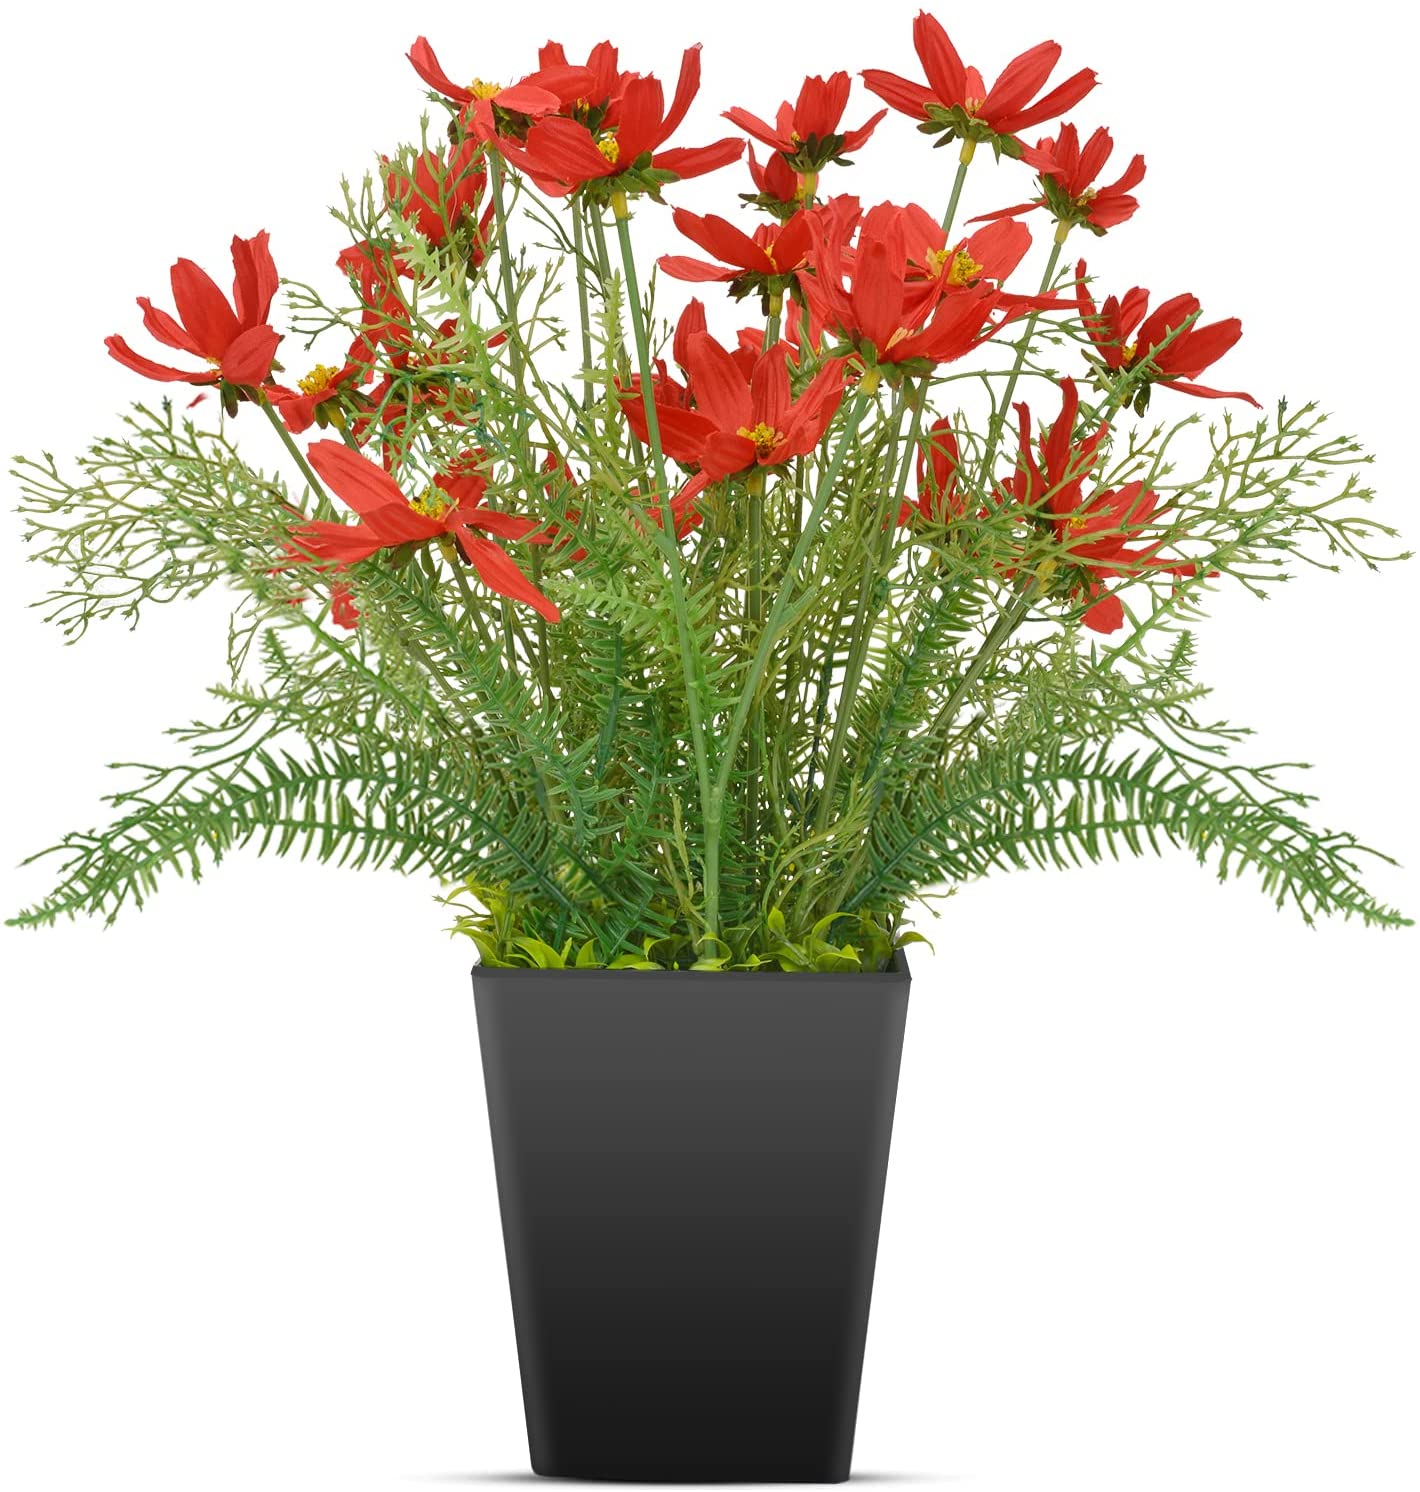 luxsego Artificial Coreopsis Flowers with Pot